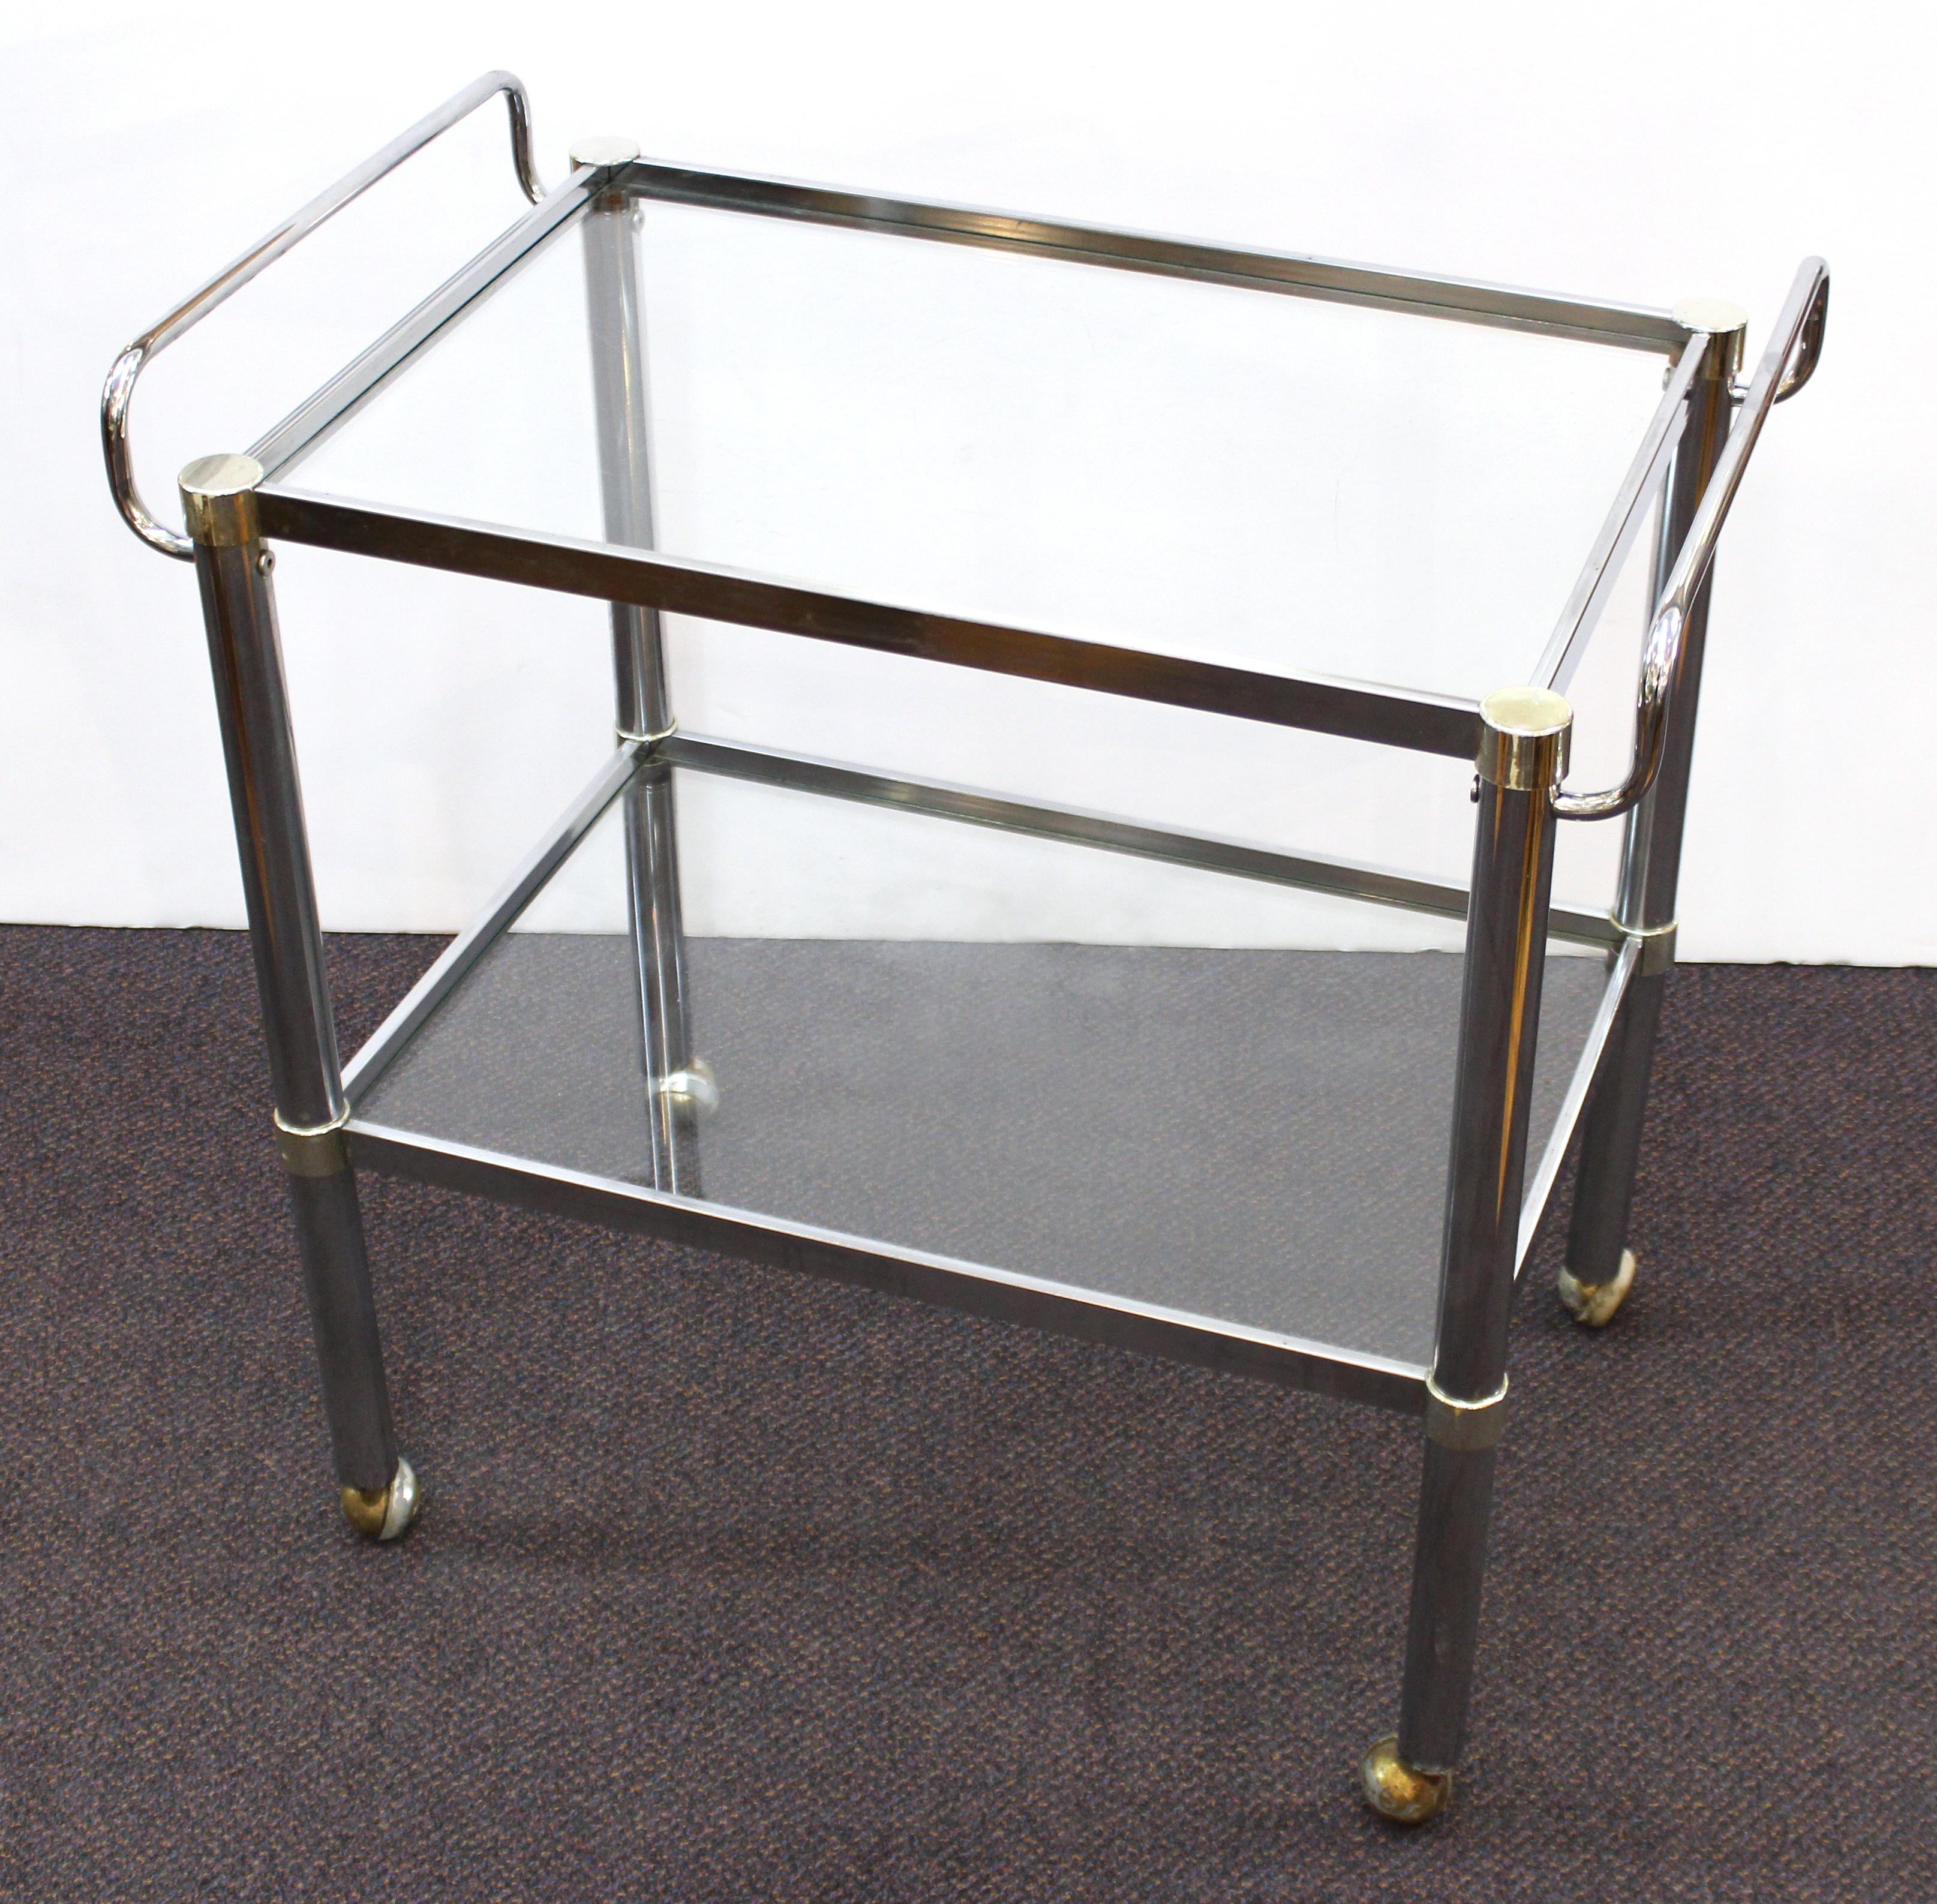 Modern chromed metal serving cart or bar cart with two glass levels and handle bars on front and back side. The piece is in good vintage condition with age-appropriate wear.